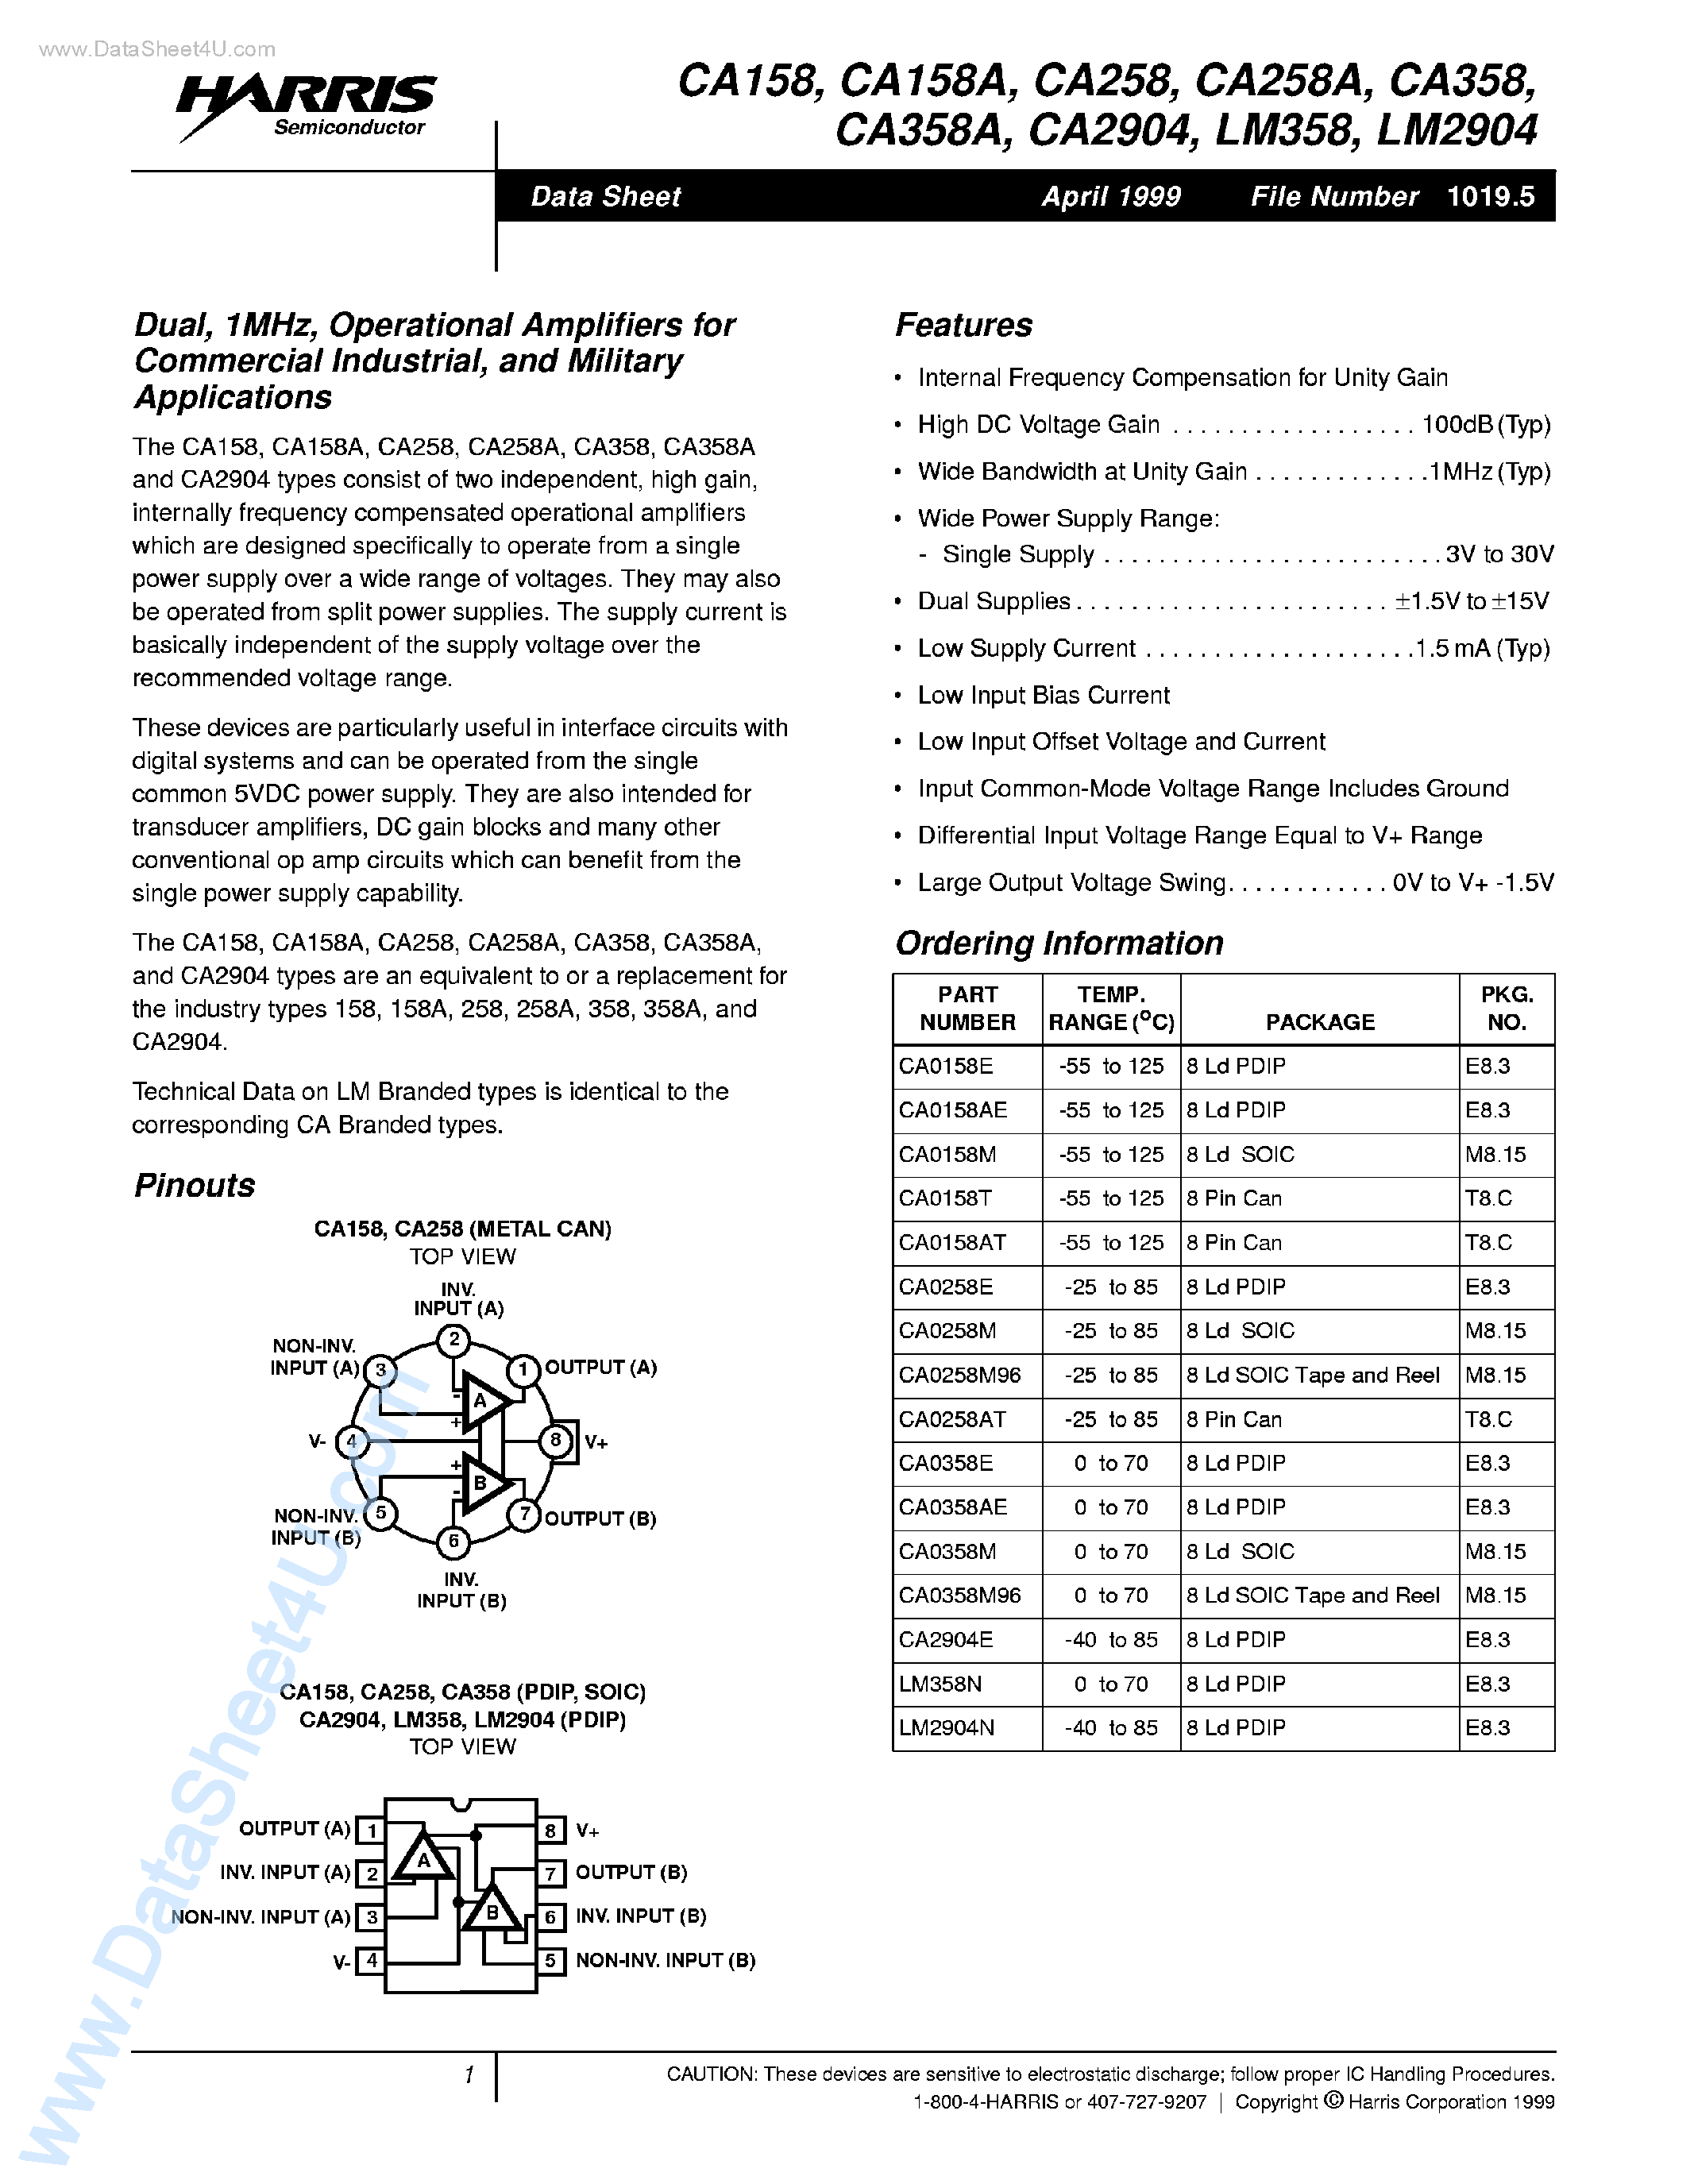 Datasheet CA258 - (CA258A / CA258 / CA2904) Operational Amplifiers page 1